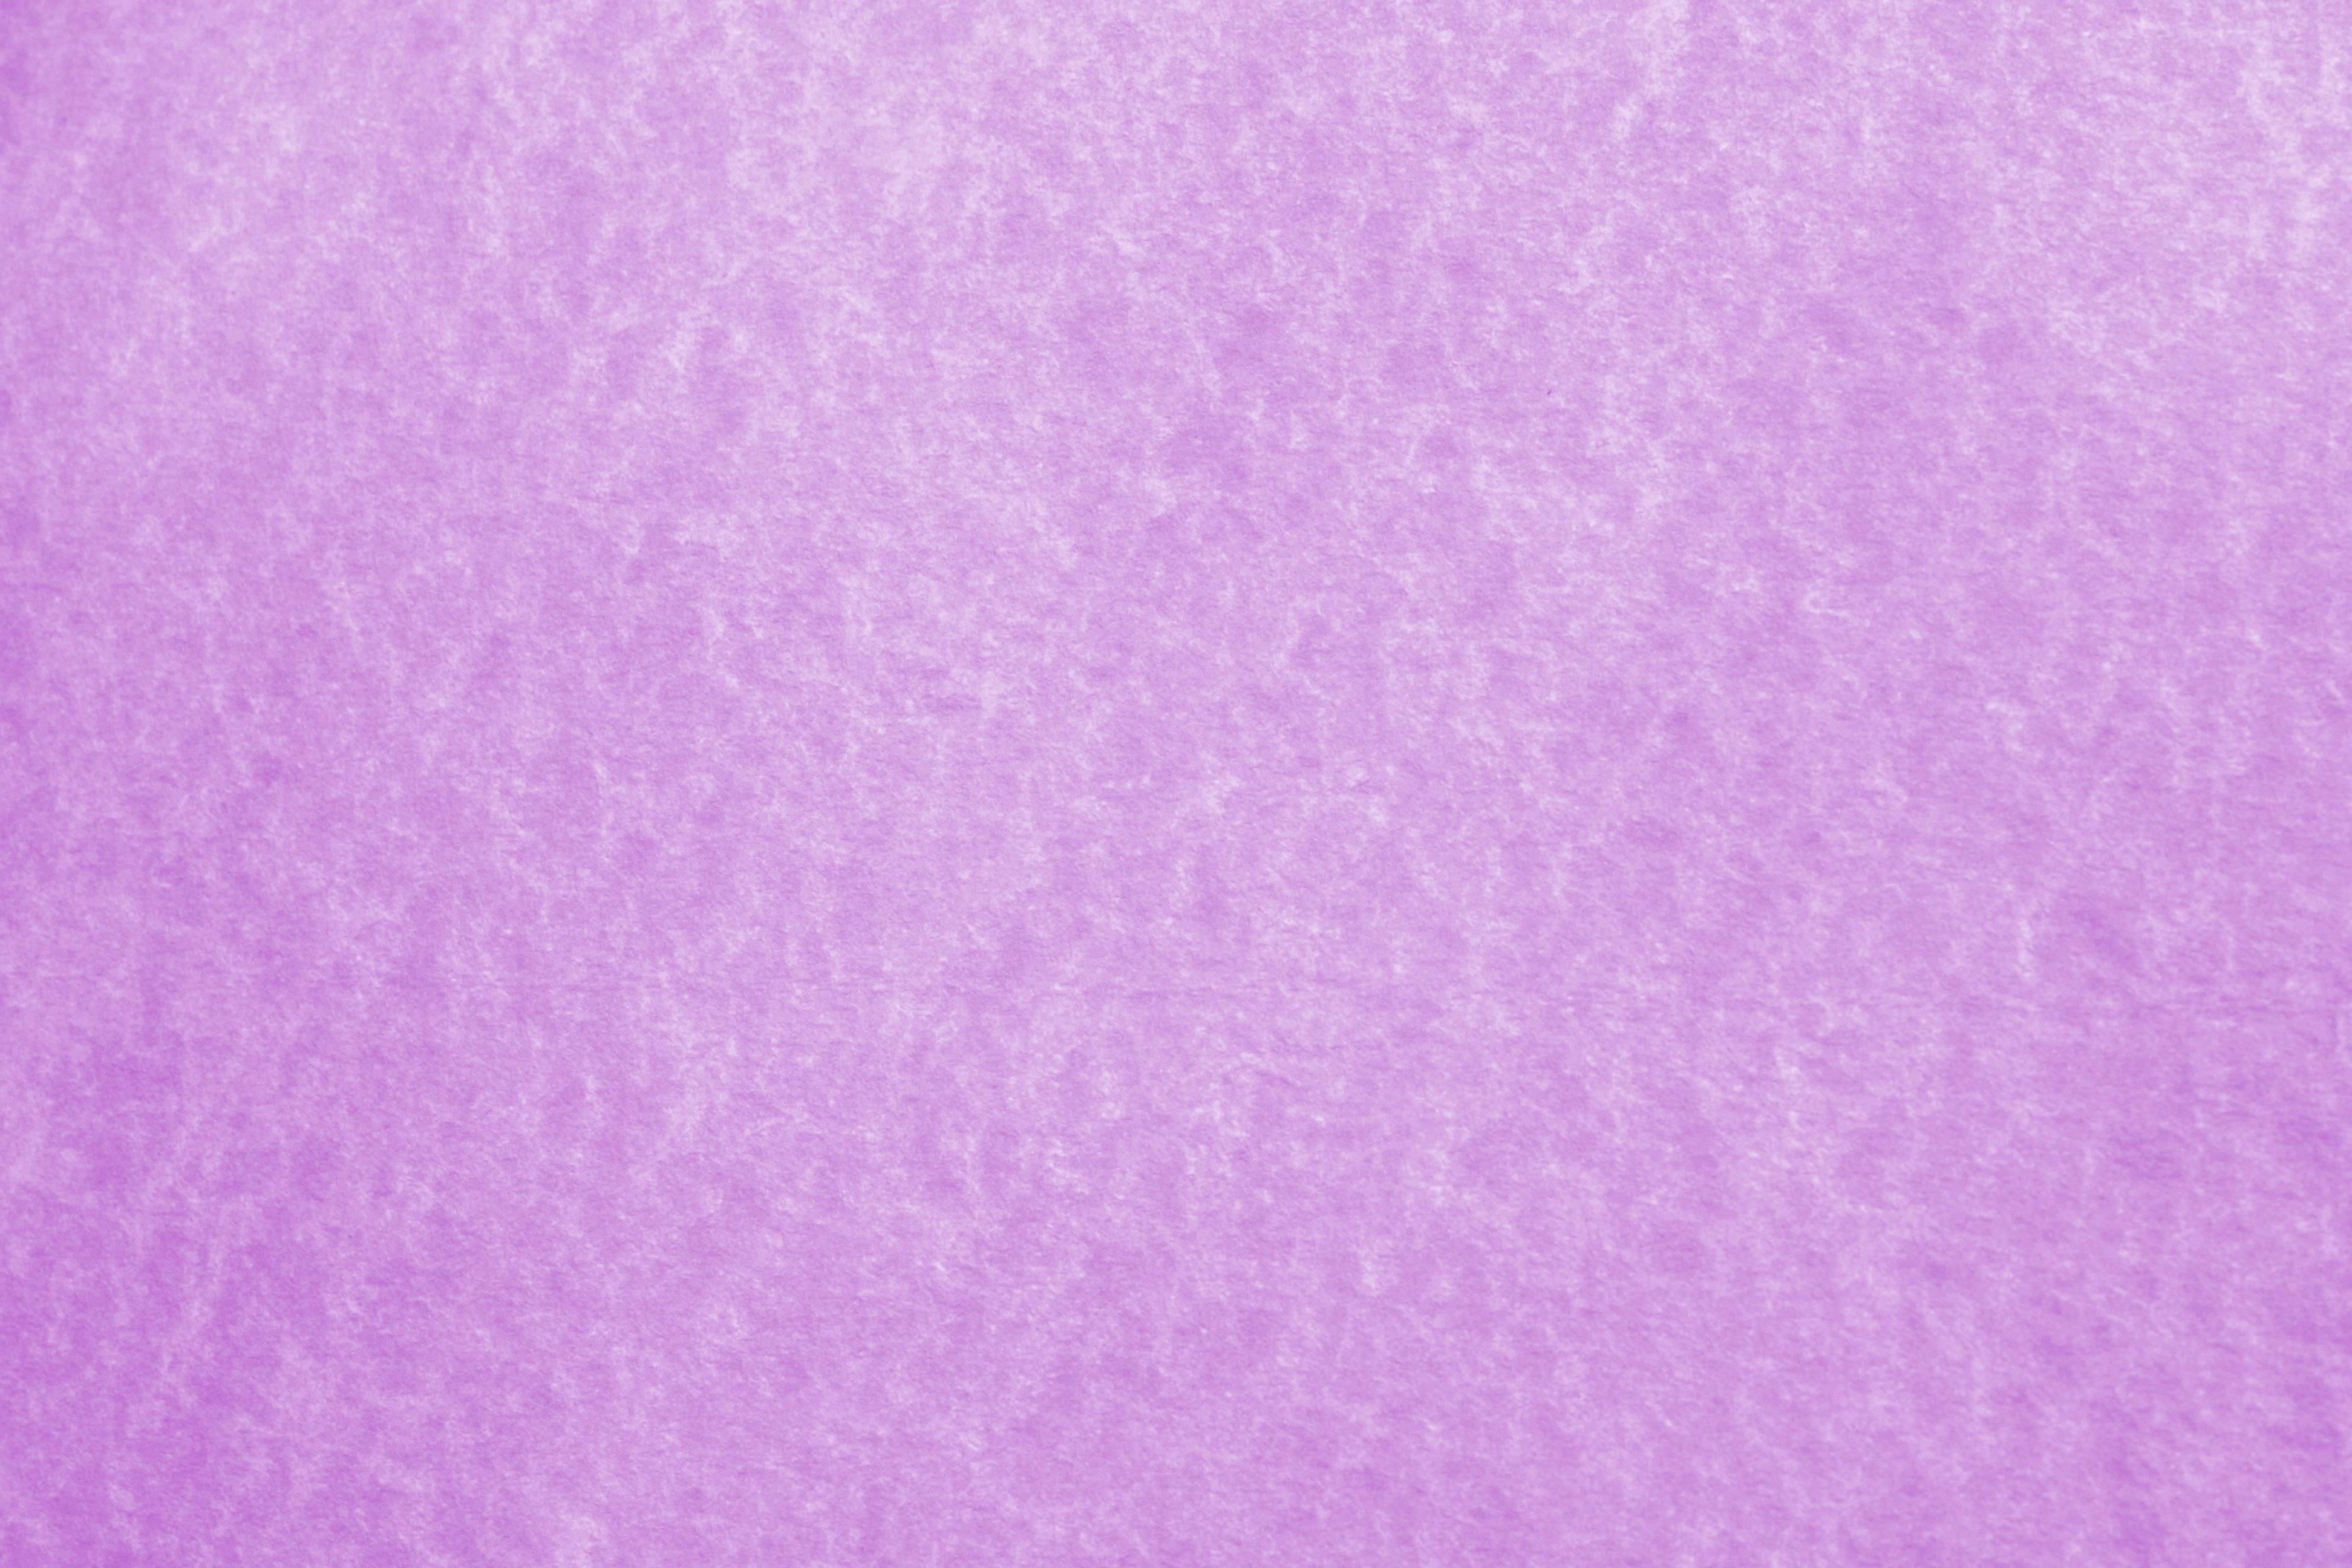 Simple Light Purple Background Image 6 HD Wallpaper. Hdimges